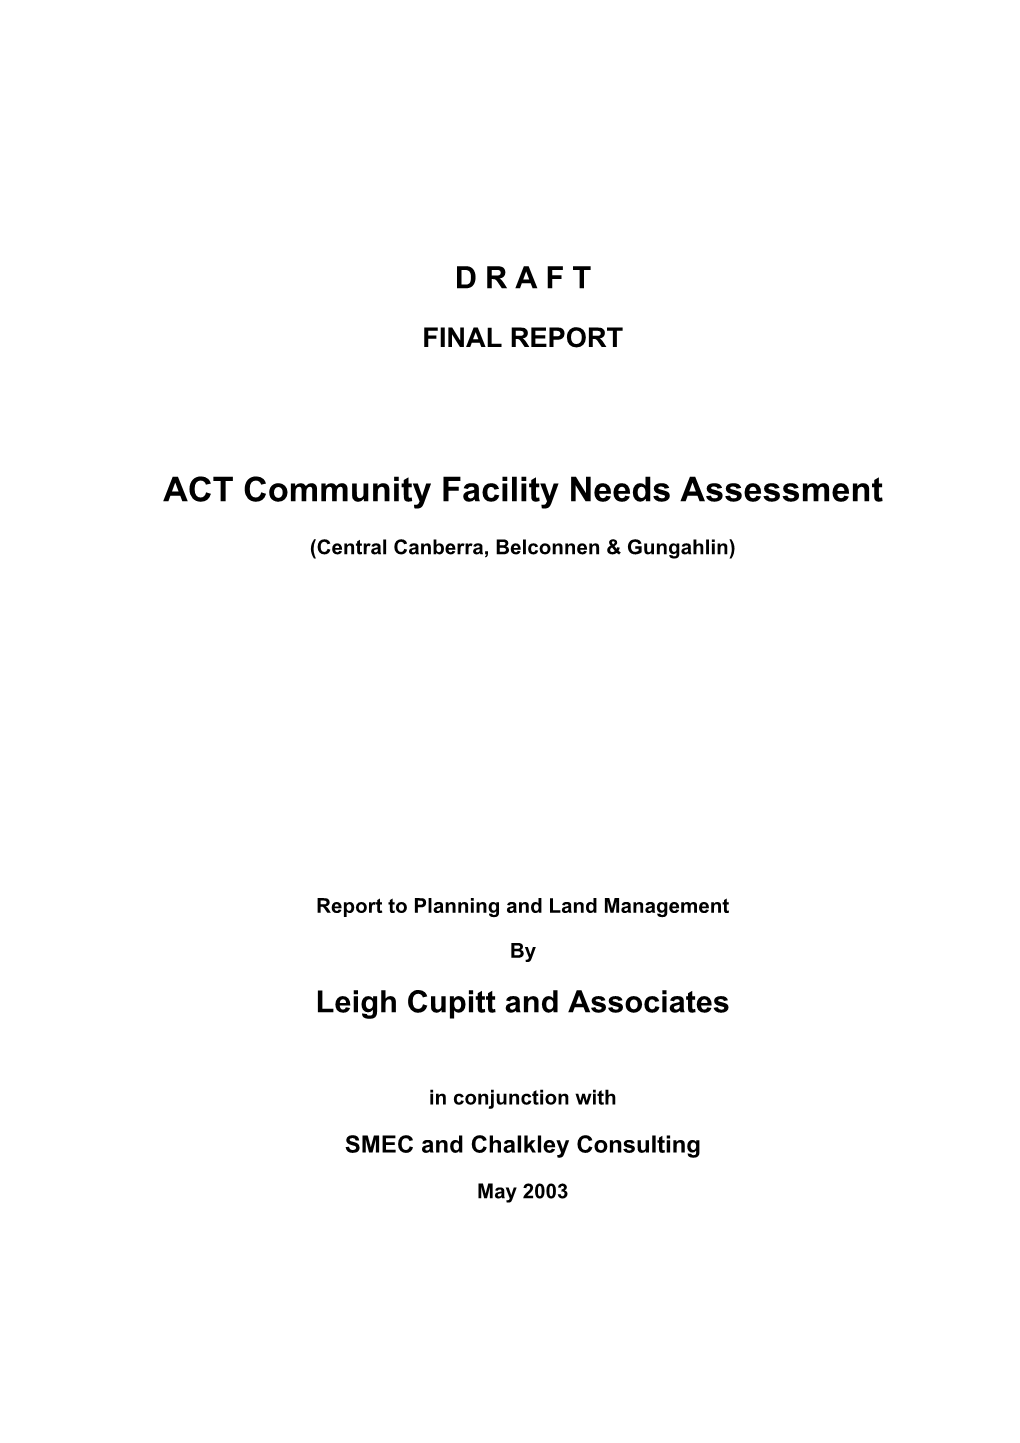 ACT Community Facility Needs Assessment